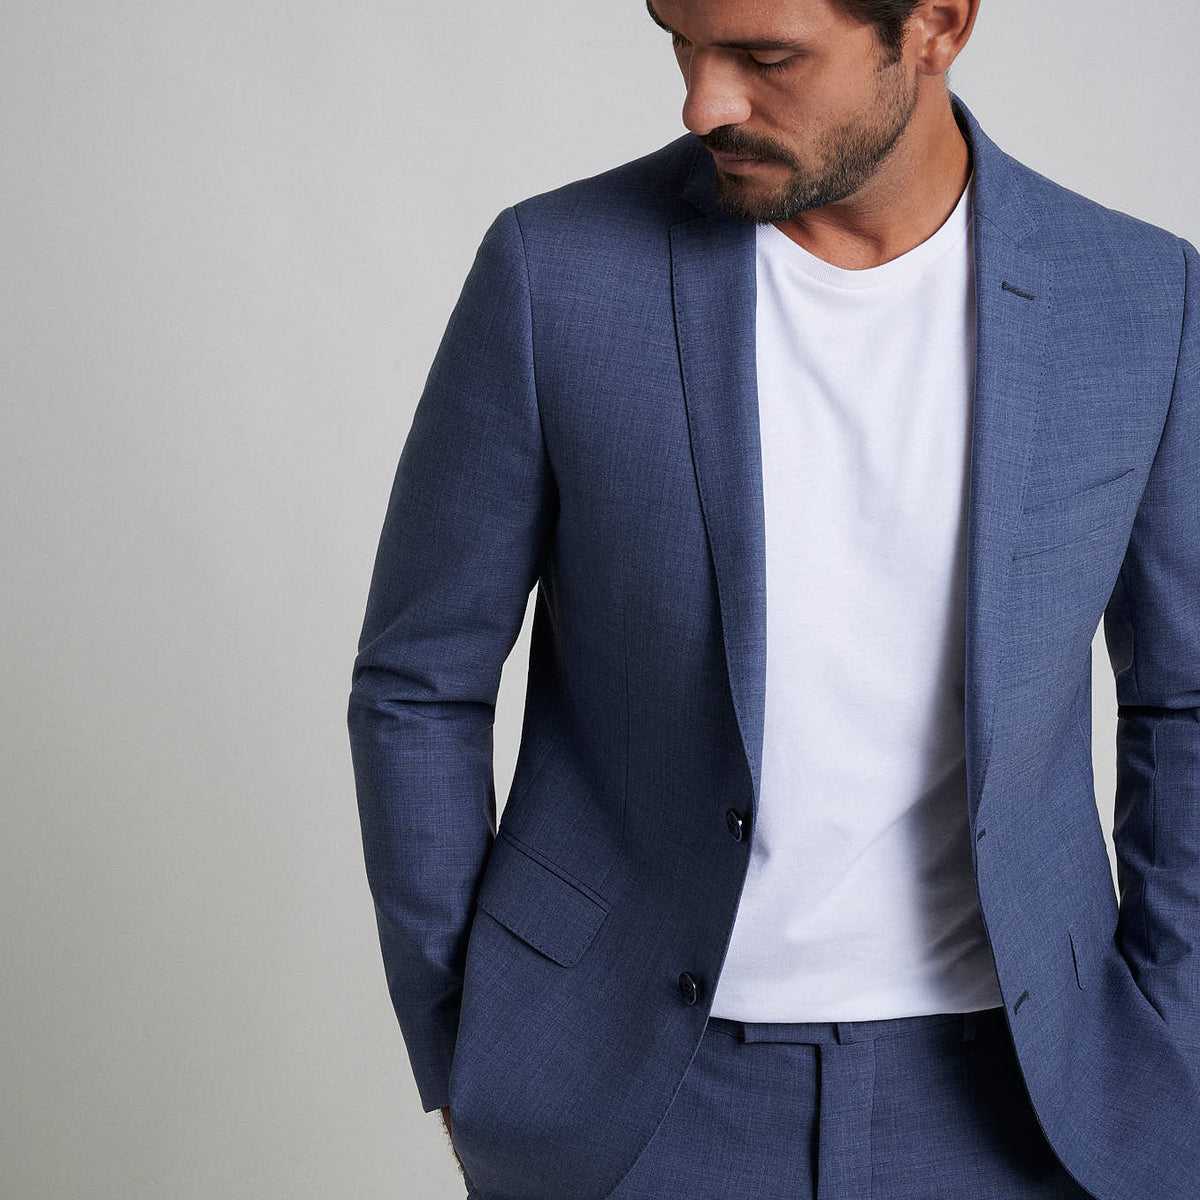 Tailored fit 100% refined wool suit half canvas construction ...